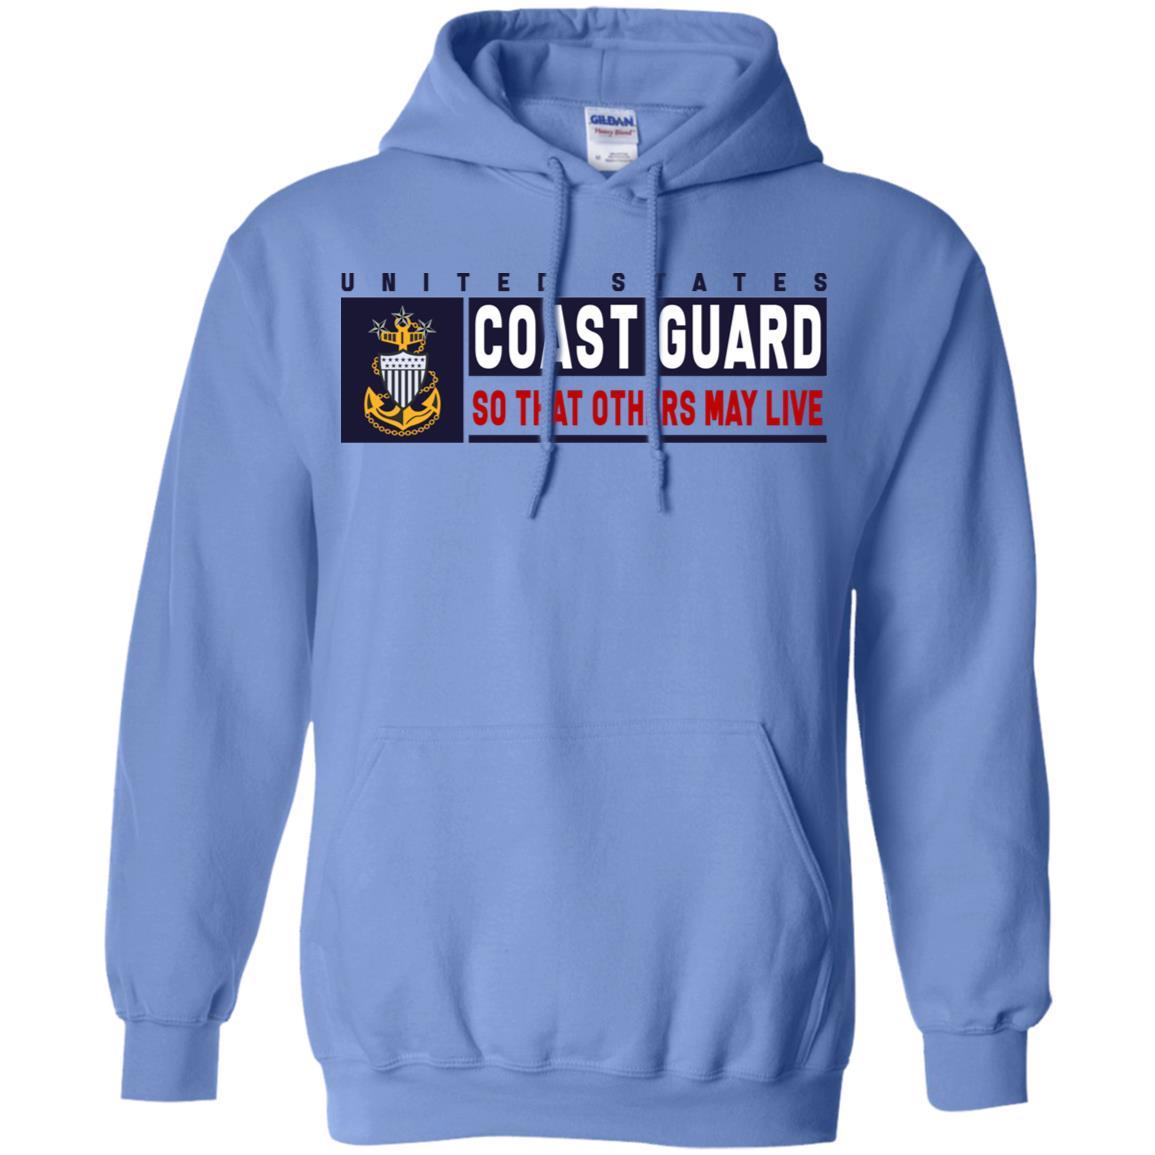 US Coast Guard E-9 Master Chief Petty Officer Of The Coast Guard E9 MCPOC So That Others May Live Long Sleeve - Pullover Hoodie-TShirt-USCG-Veterans Nation